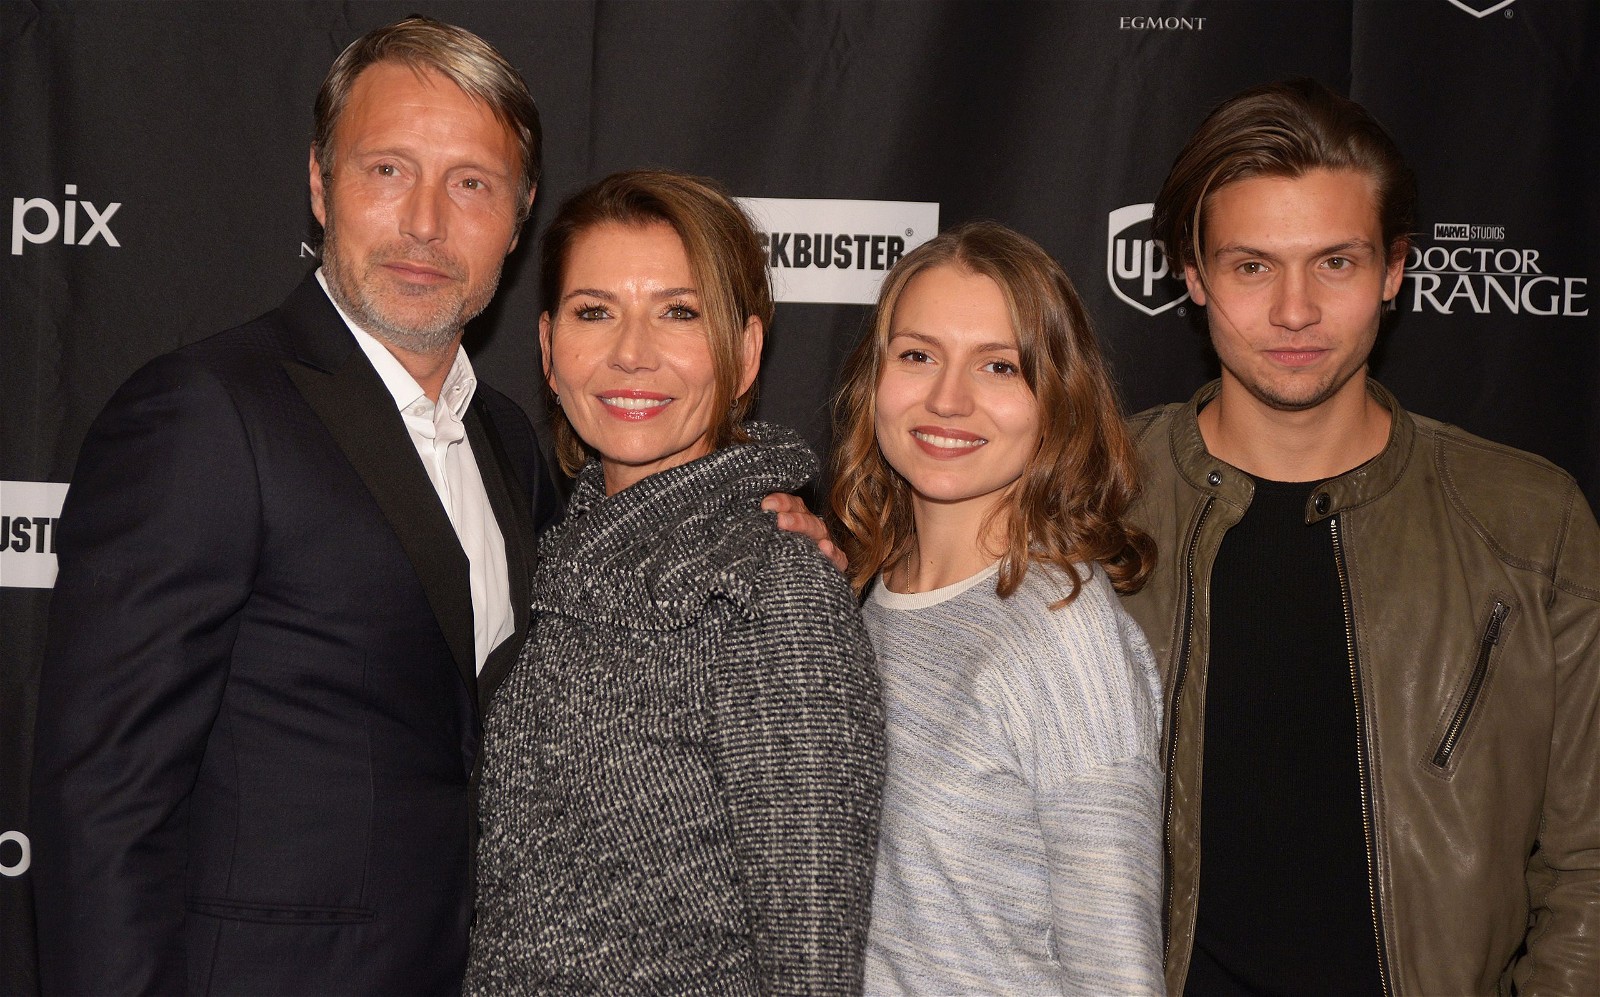 Mads Mikkelsen with his wife and kids